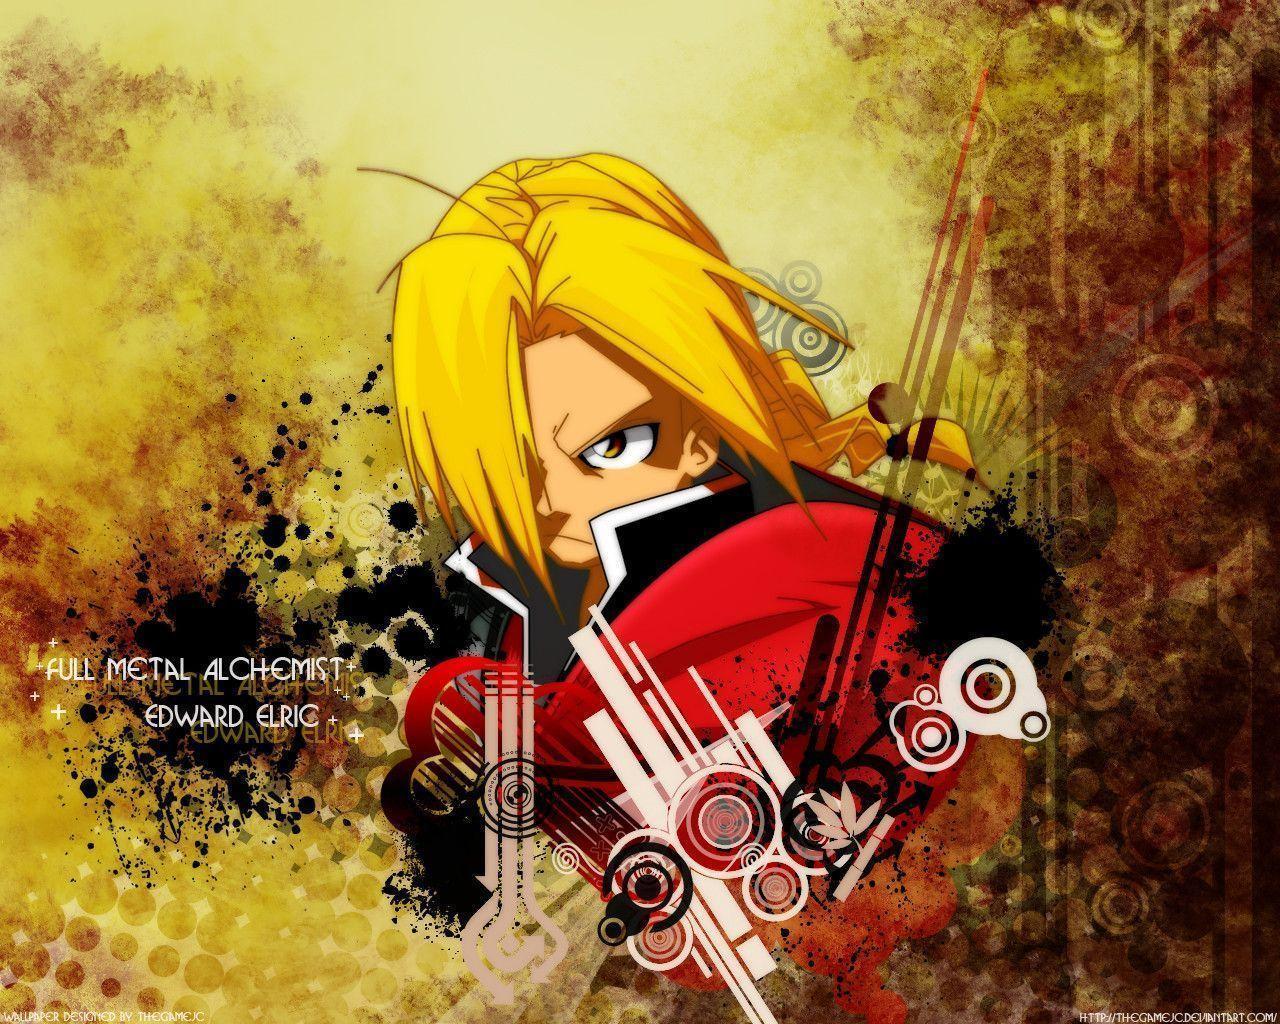 Edward Elric Wallpapers by Shin